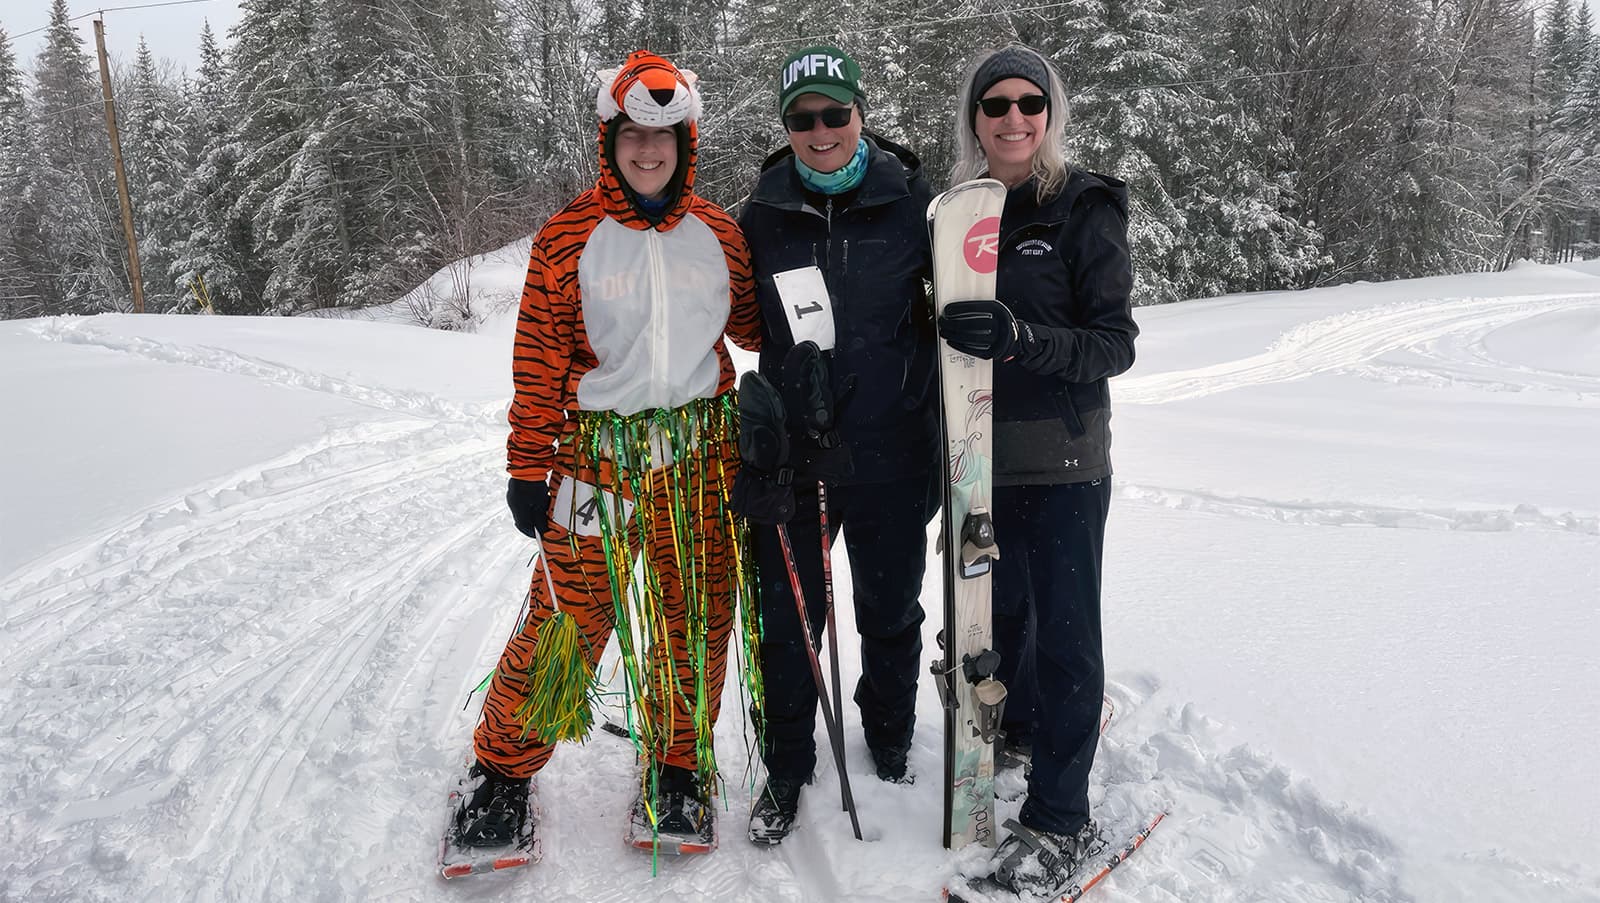 three UMFK employees pose smiling while near the cross-country trail; one of the employees is wearing a bengal costume